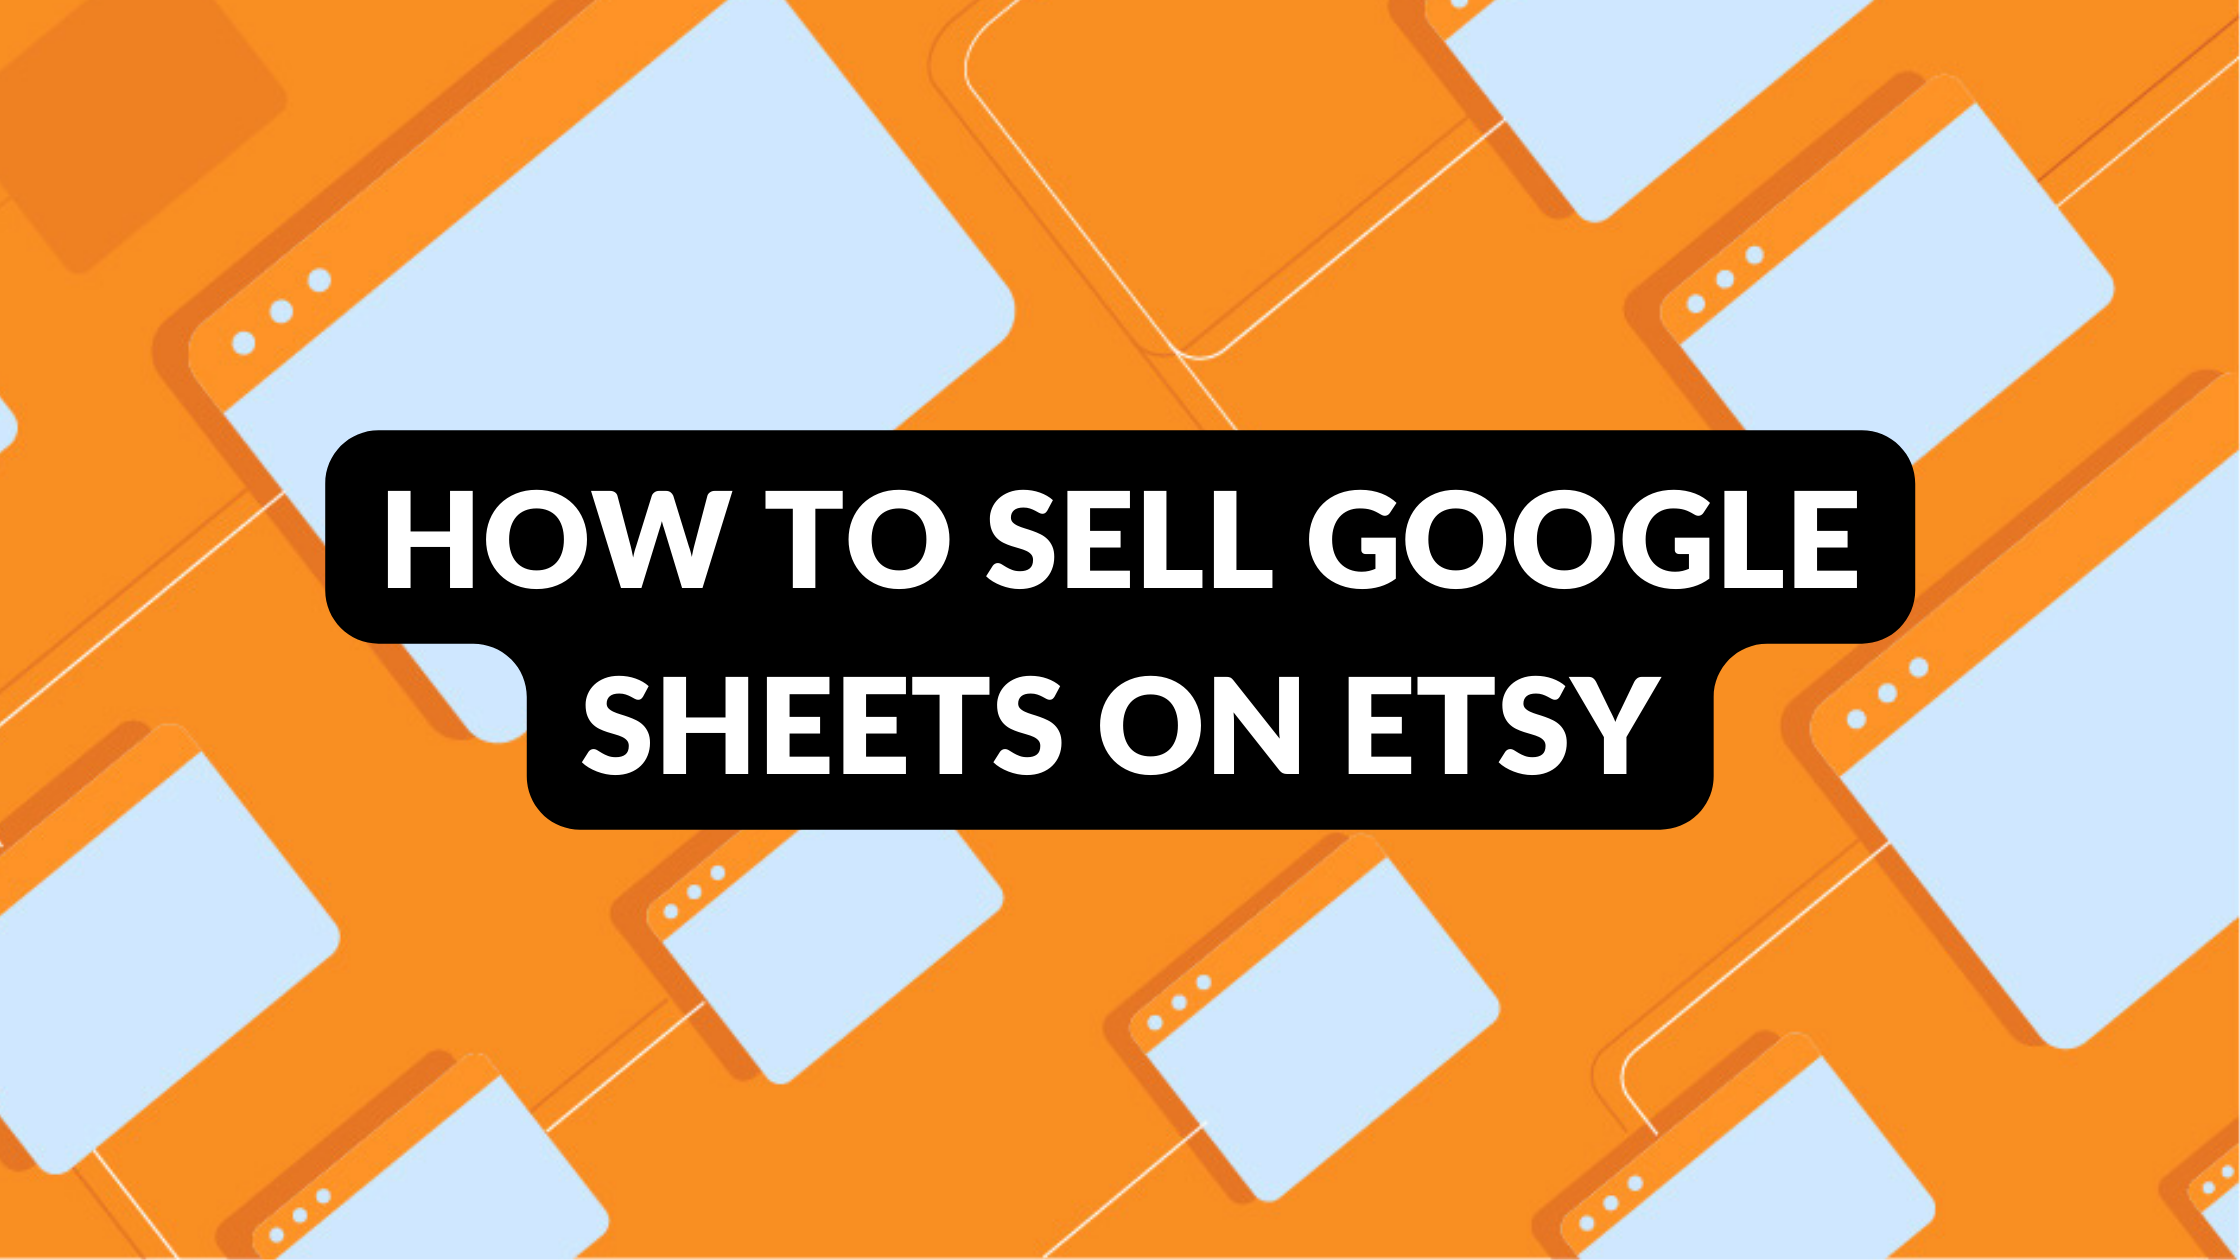 How to Sell Google Sheets on Etsy